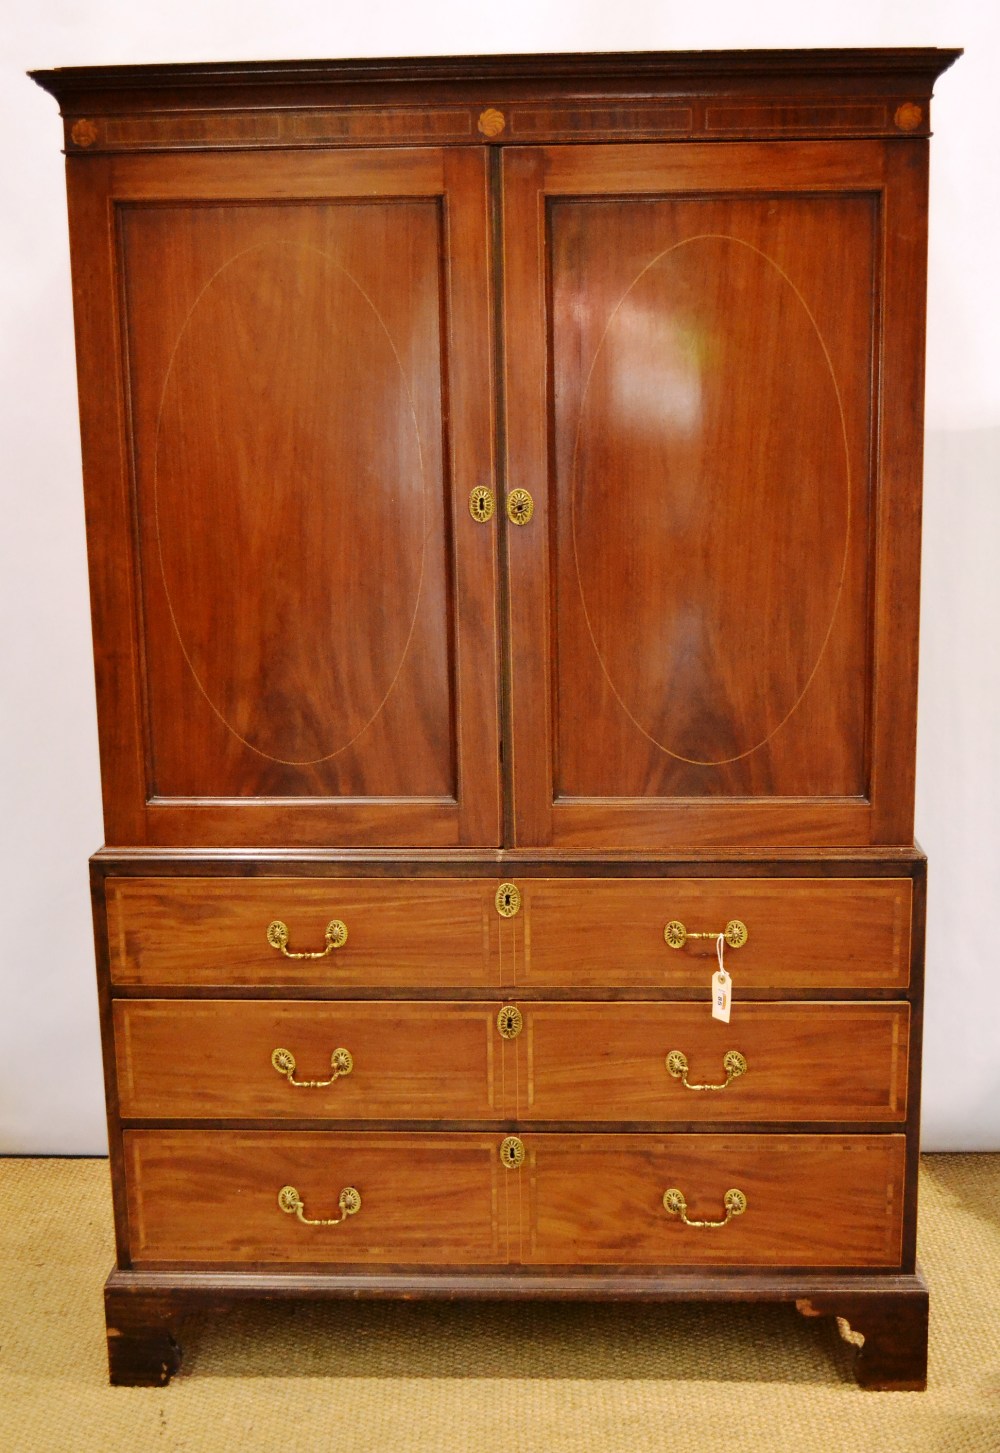 A Channel Islands early nineteenth century mahogany linen press, inlaid stringing with satinwood